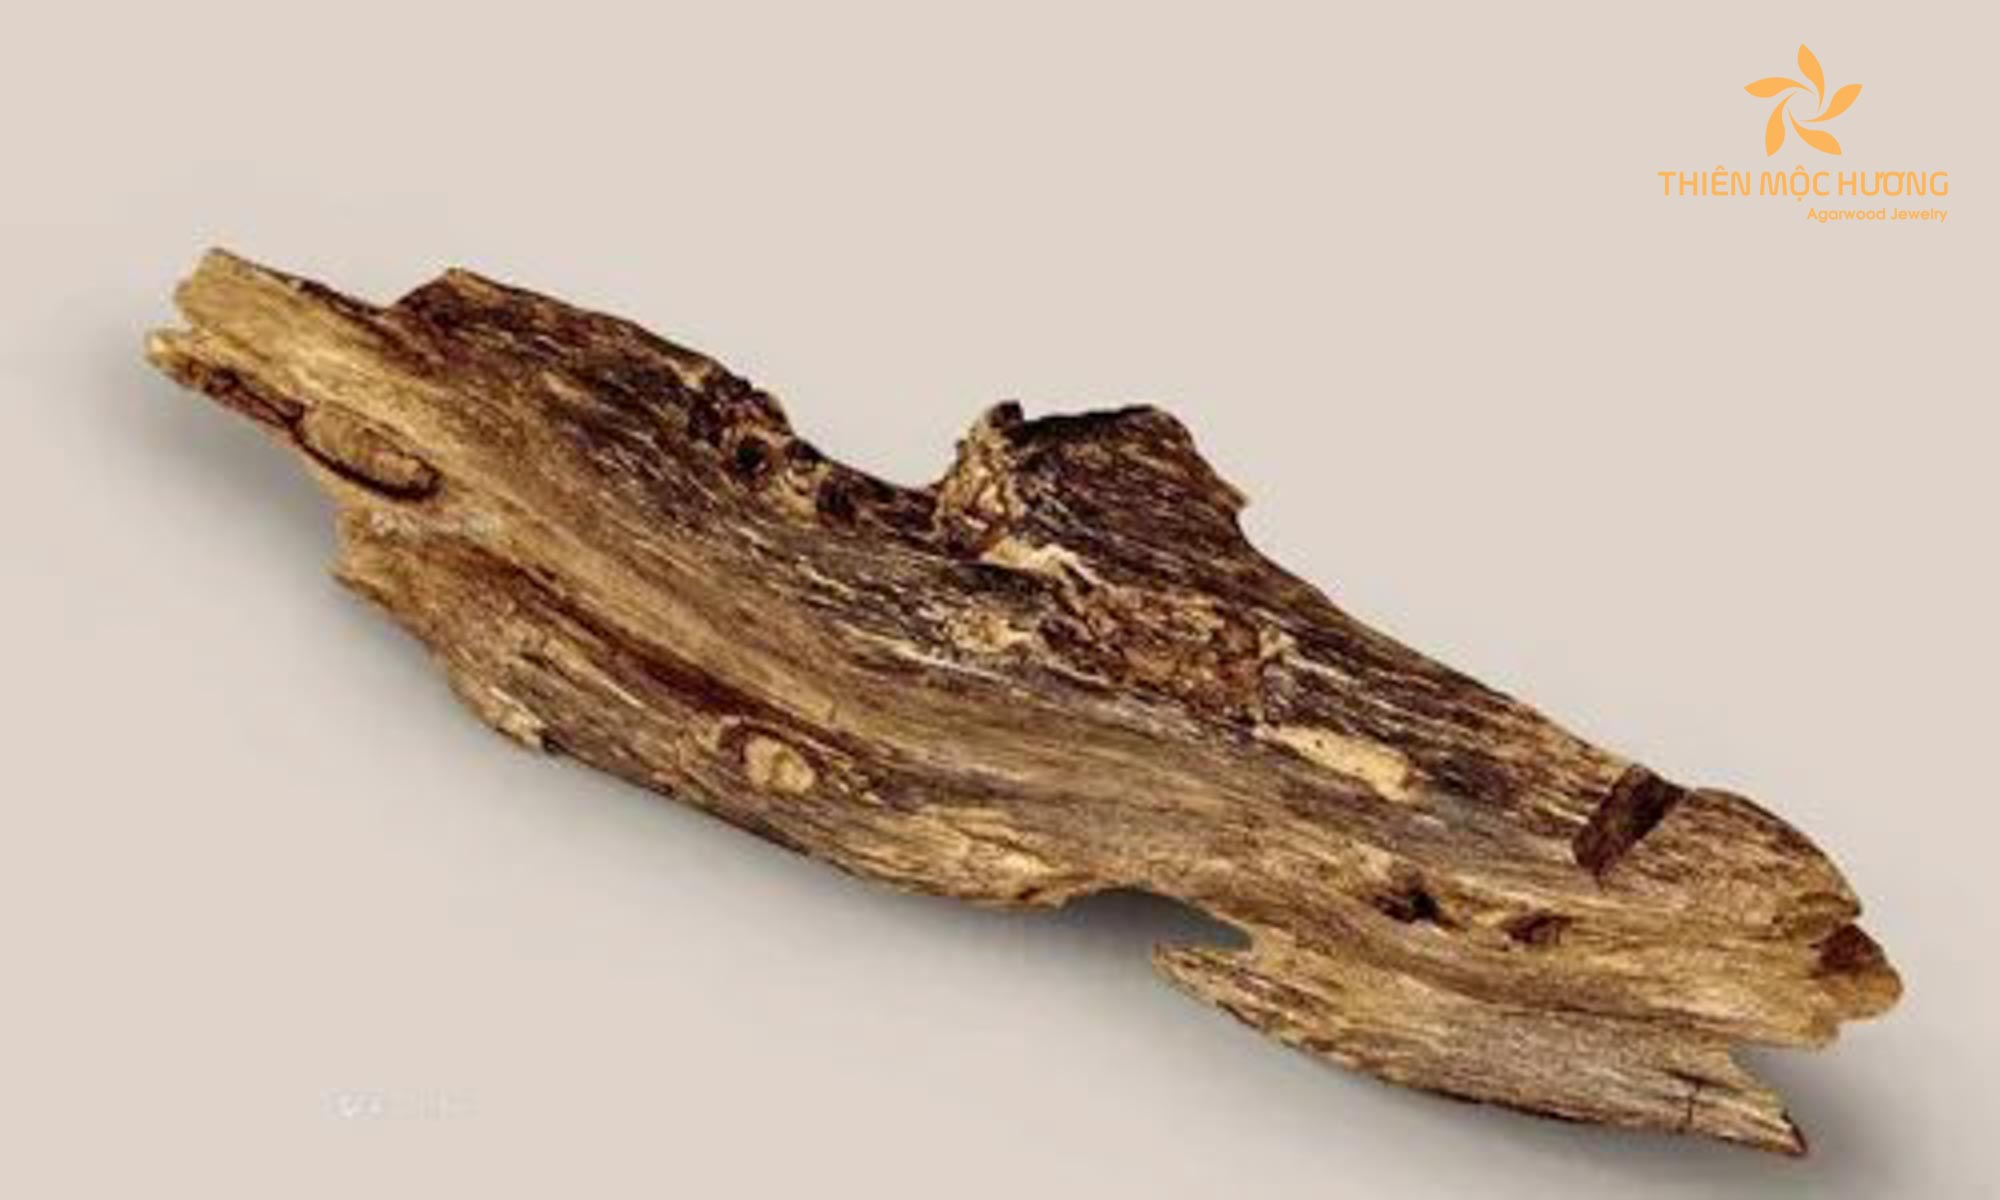 Scientific studies and evidence about healing properties of Agarwood